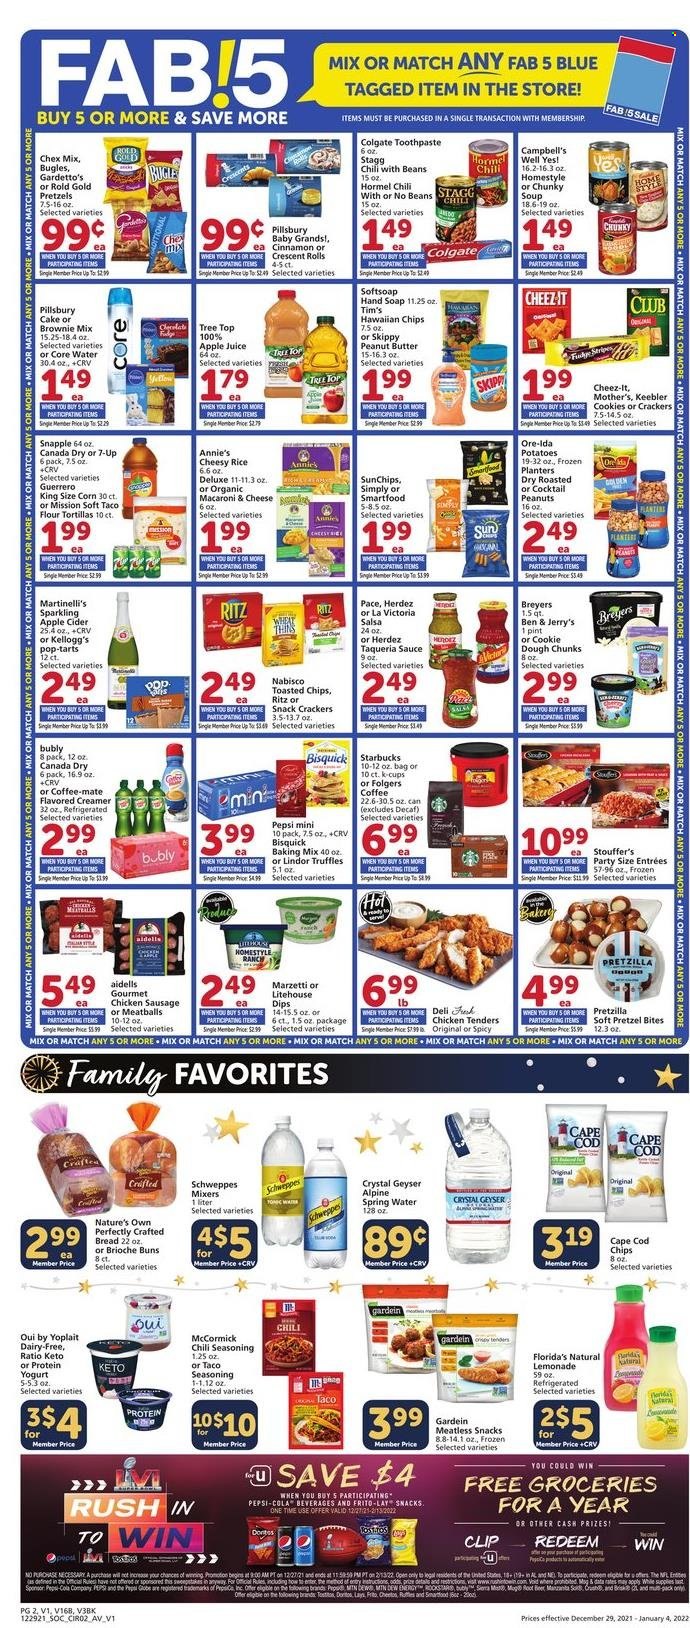 thumbnail - Vons Flyer - 12/29/2021 - 01/04/2022 - Sales products - bread, tortillas, pretzels, cake, buns, brioche, flour tortillas, crescent rolls, brownie mix, corn, potatoes, chicken tenders, cod, Campbell's, macaroni & cheese, meatballs, soup, sauce, Pillsbury, Annie's, Hormel, sausage, chicken sausage, yoghurt, Yoplait, Coffee-Mate, creamer, Ben & Jerry's, Stouffer's, Ore-Ida, cookie dough, cookies, snack, Lindor, truffles, crackers, Kellogg's, Pop-Tarts, Florida's Natural, Keebler, RITZ, Doritos, Smartfood, Thins, Cheez-It, Chex Mix, Bisquick, rice, spice, cinnamon, salsa, peanut butter, peanuts, Planters, apple juice, Canada Dry, lemonade, Schweppes, Pepsi, juice, 7UP, Snapple, spring water, Starbucks, Folgers, coffee capsules, K-Cups, apple cider, cider, beer, Softsoap, hand soap, soap, Colgate, toothpaste, Nature's Own. Page 2.